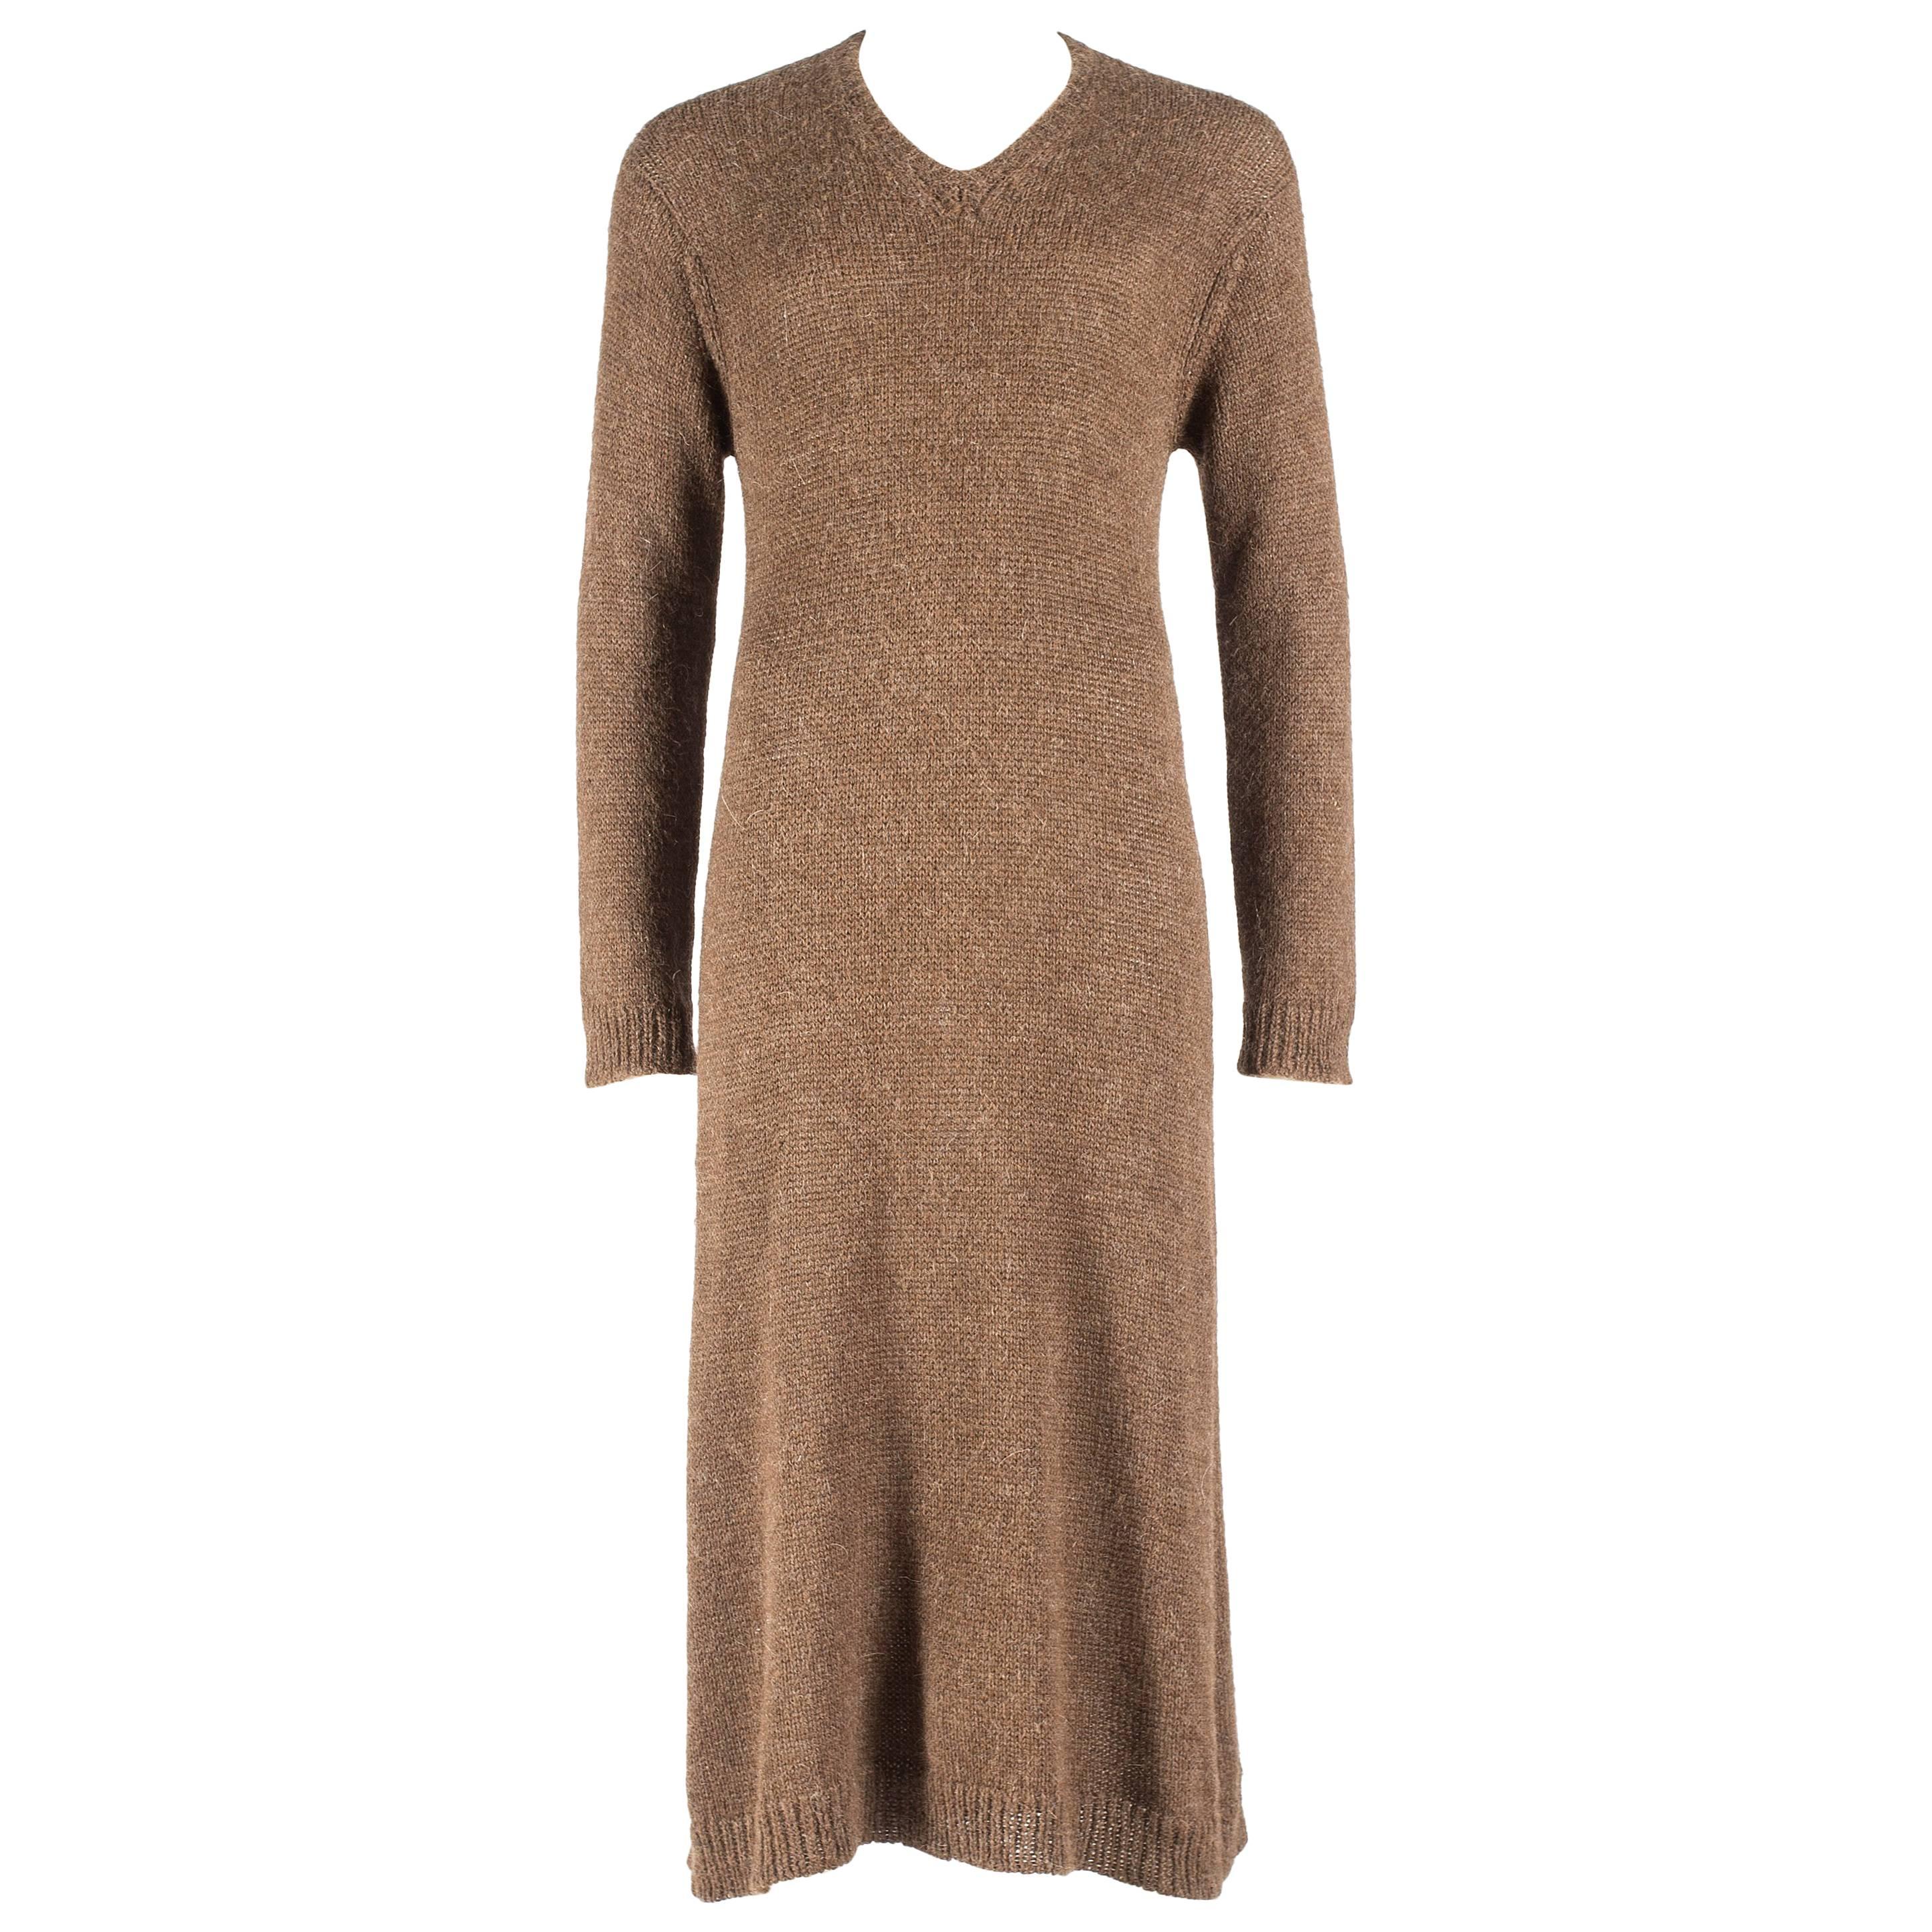 Comme des Garcons Homme Plus brown wool knitted v-neck sweater dress, A / W 1995